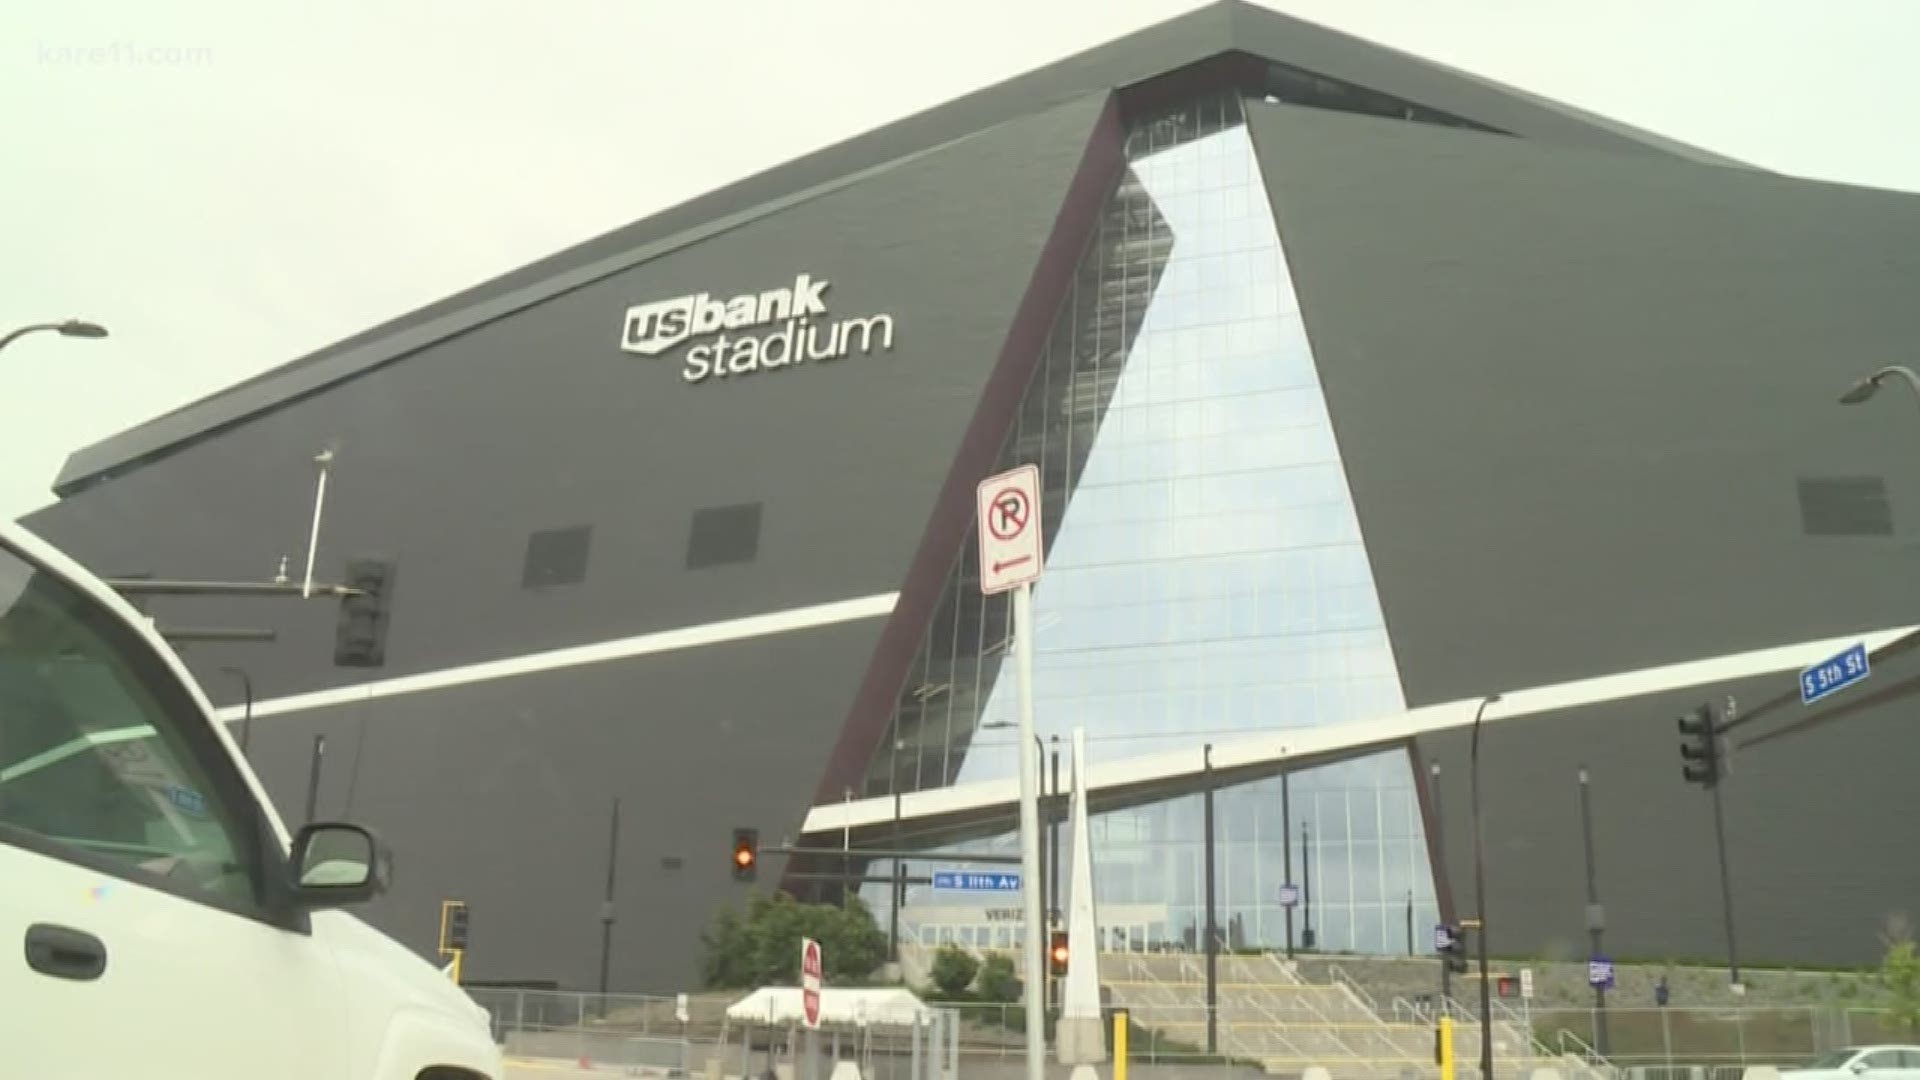 Local Muslim institutions have collaborated to create the "Super Eid" event at U.S. Bank Stadium, which commemorates the festival Eid al-Adha. But there is misinformation spreading about the event. https://kare11.tv/2wffl5R